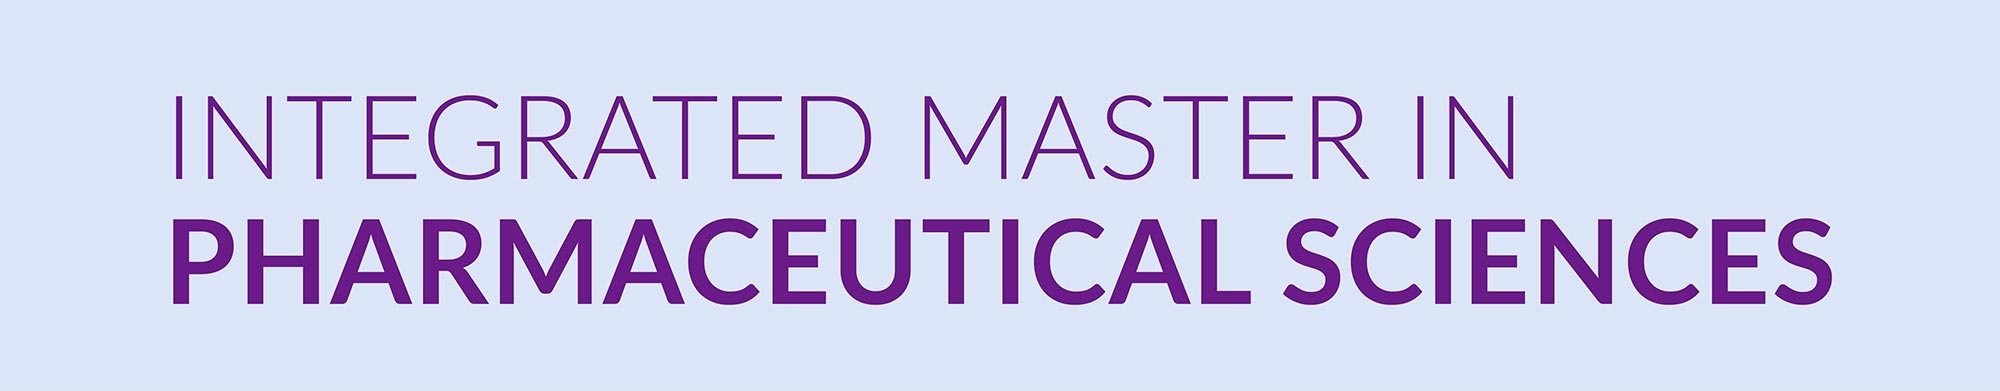 Integrated Master Degree in Pharmaceutical Sciences